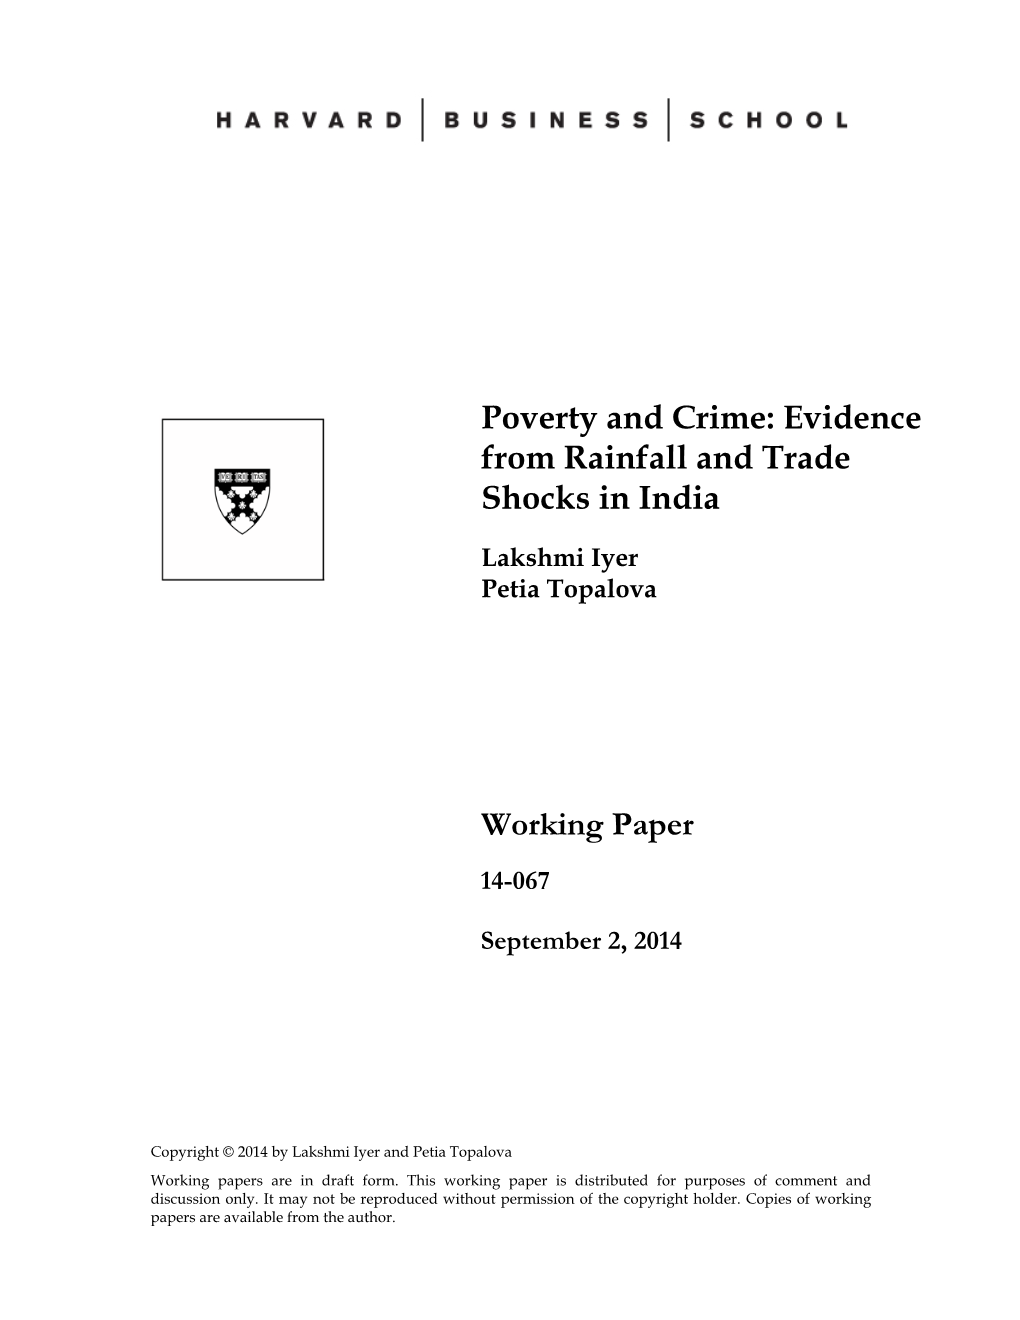 Poverty and Crime: Evidence from Rainfall and Trade Shocks in India